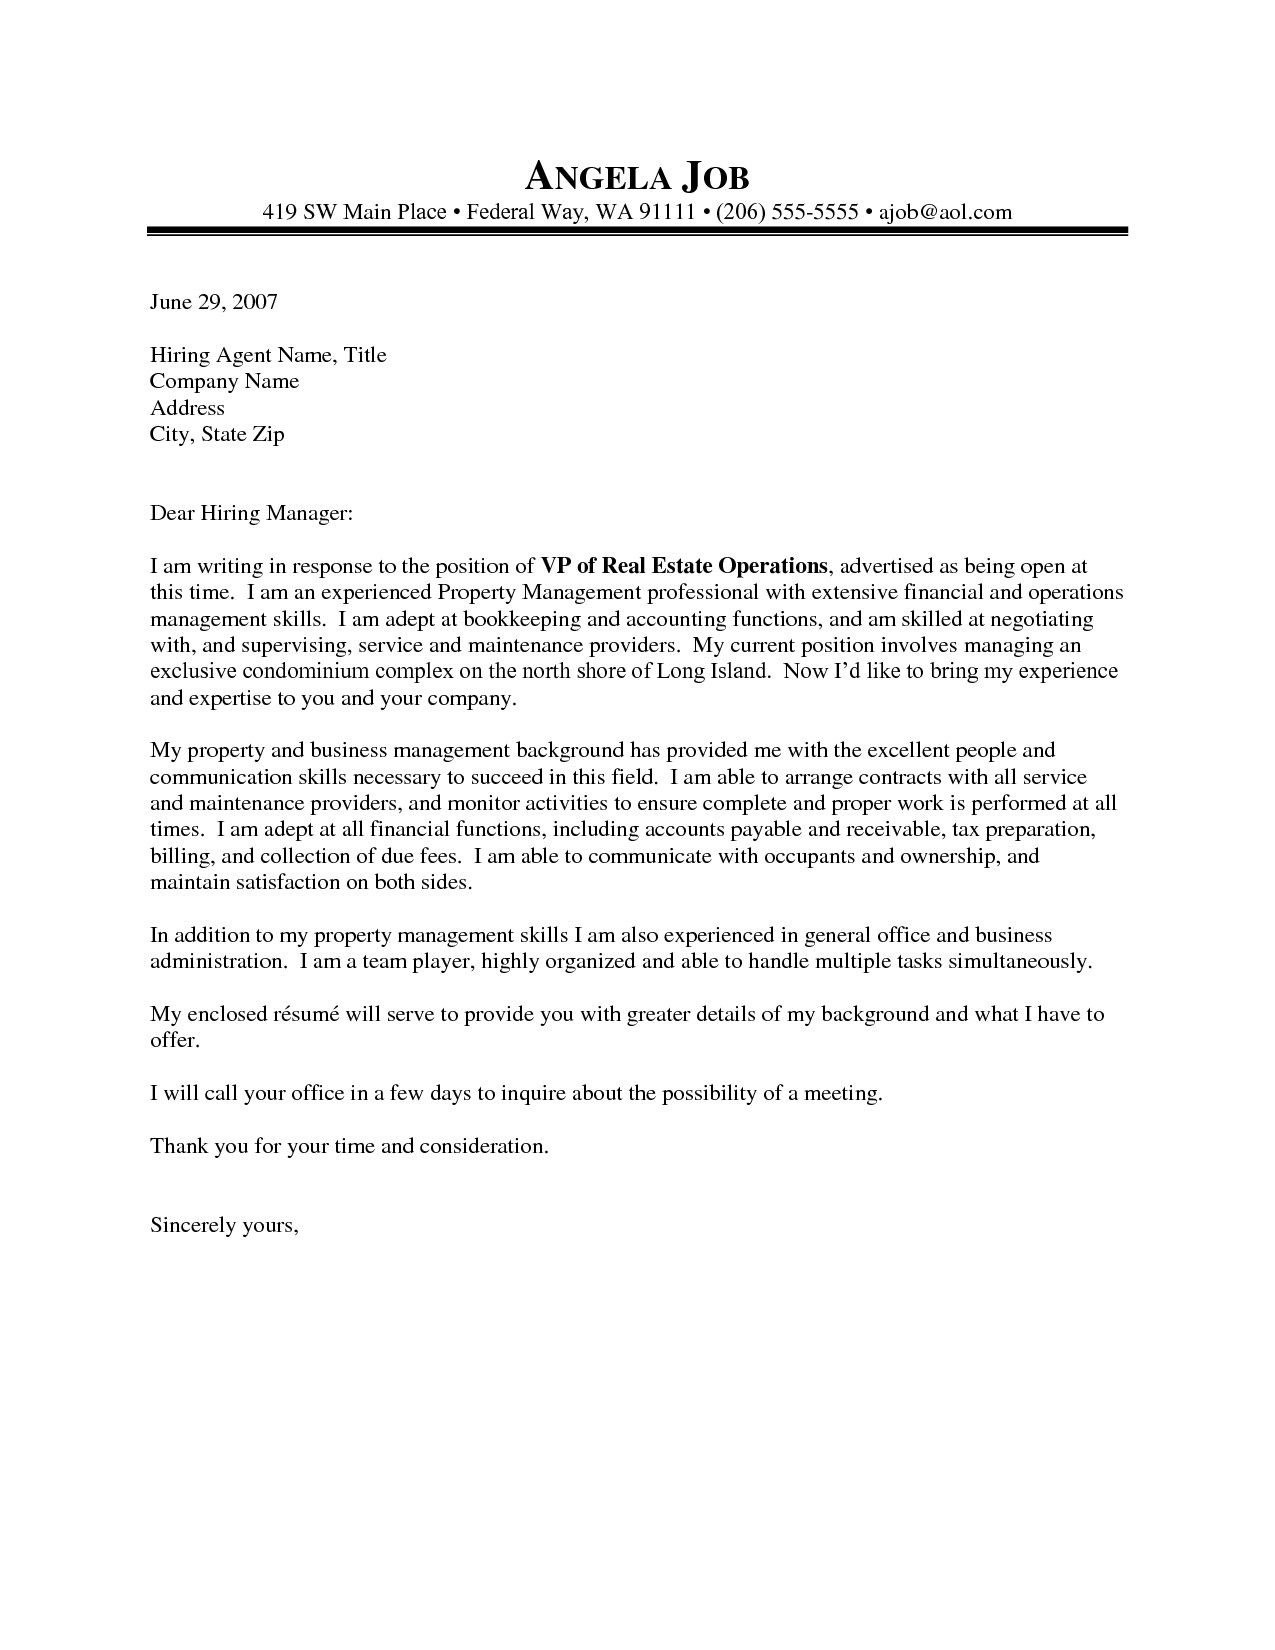 Property Management Cover Letter Template - Best Sample Resume Cover Letter Property Management